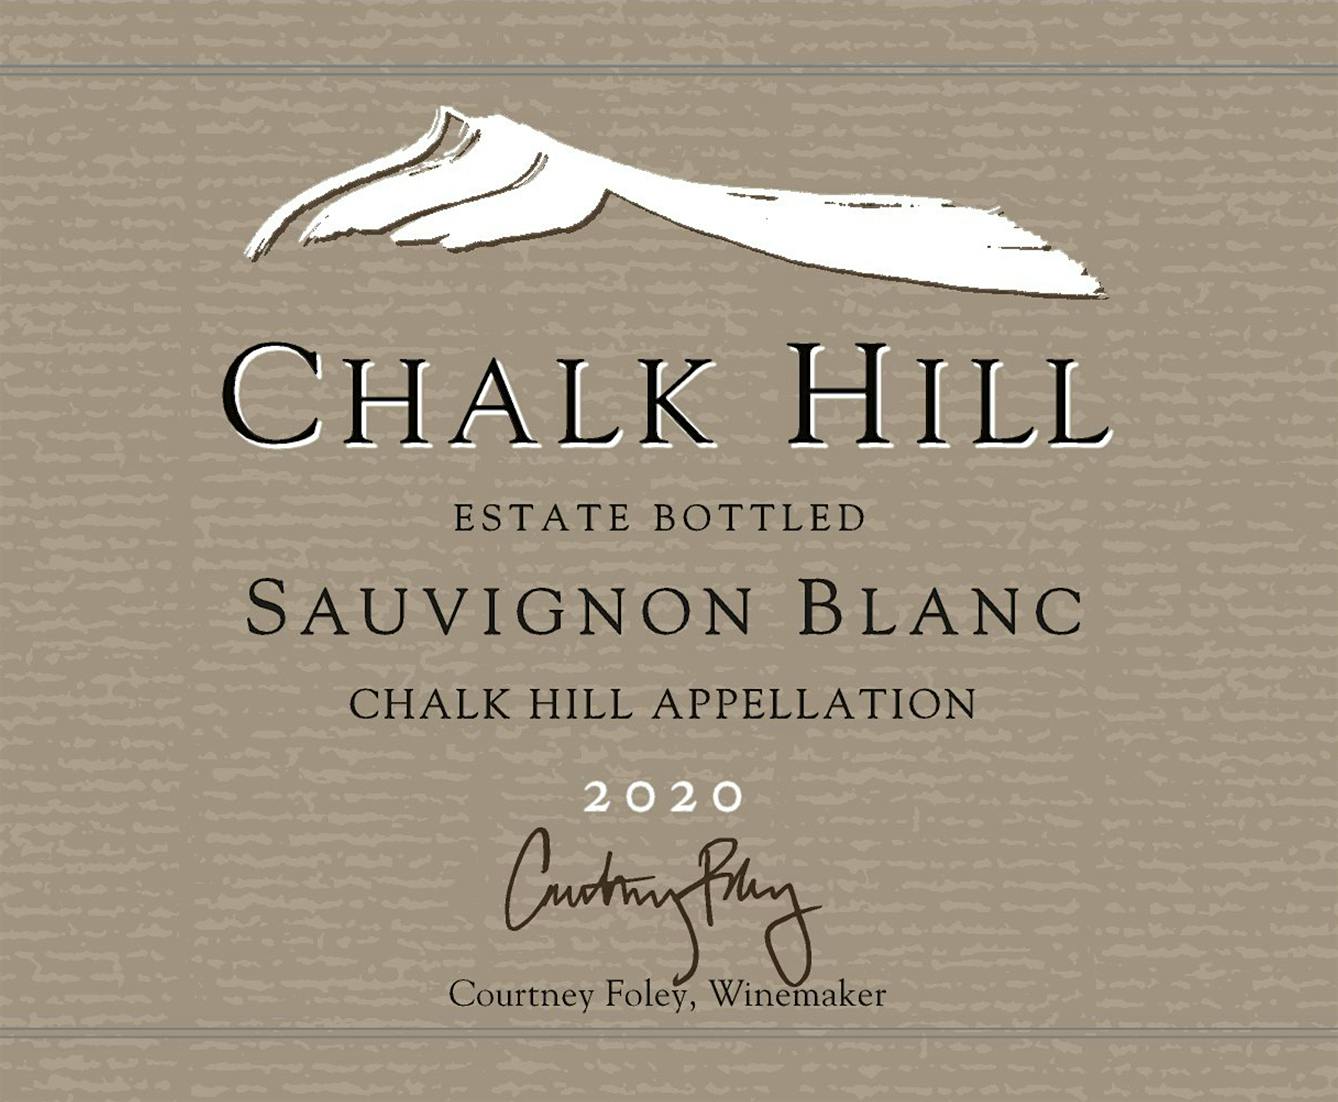 Label for Chalk Hill